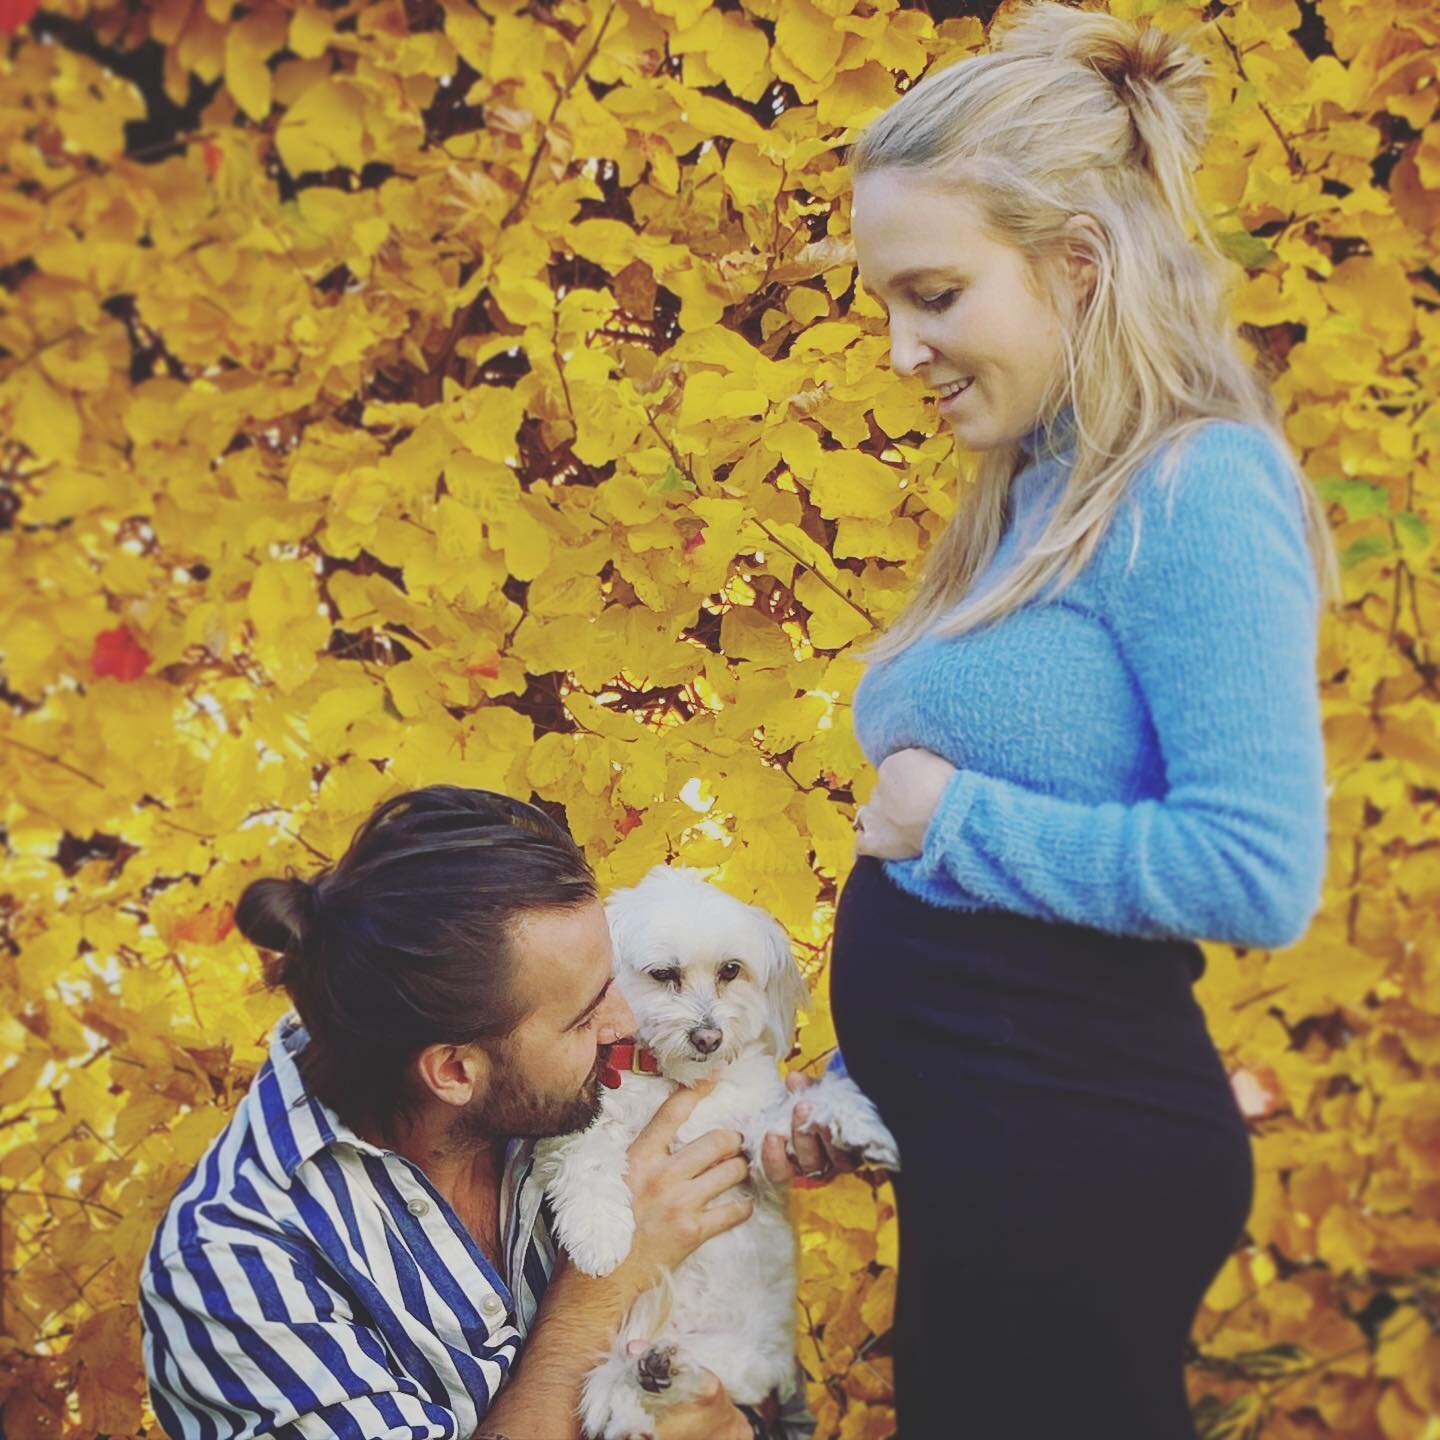 // me and my girls😍 @sabkern #stabi 
#babybelly #newbabygirl
.
.
.
.
.
got some names for her? 😋